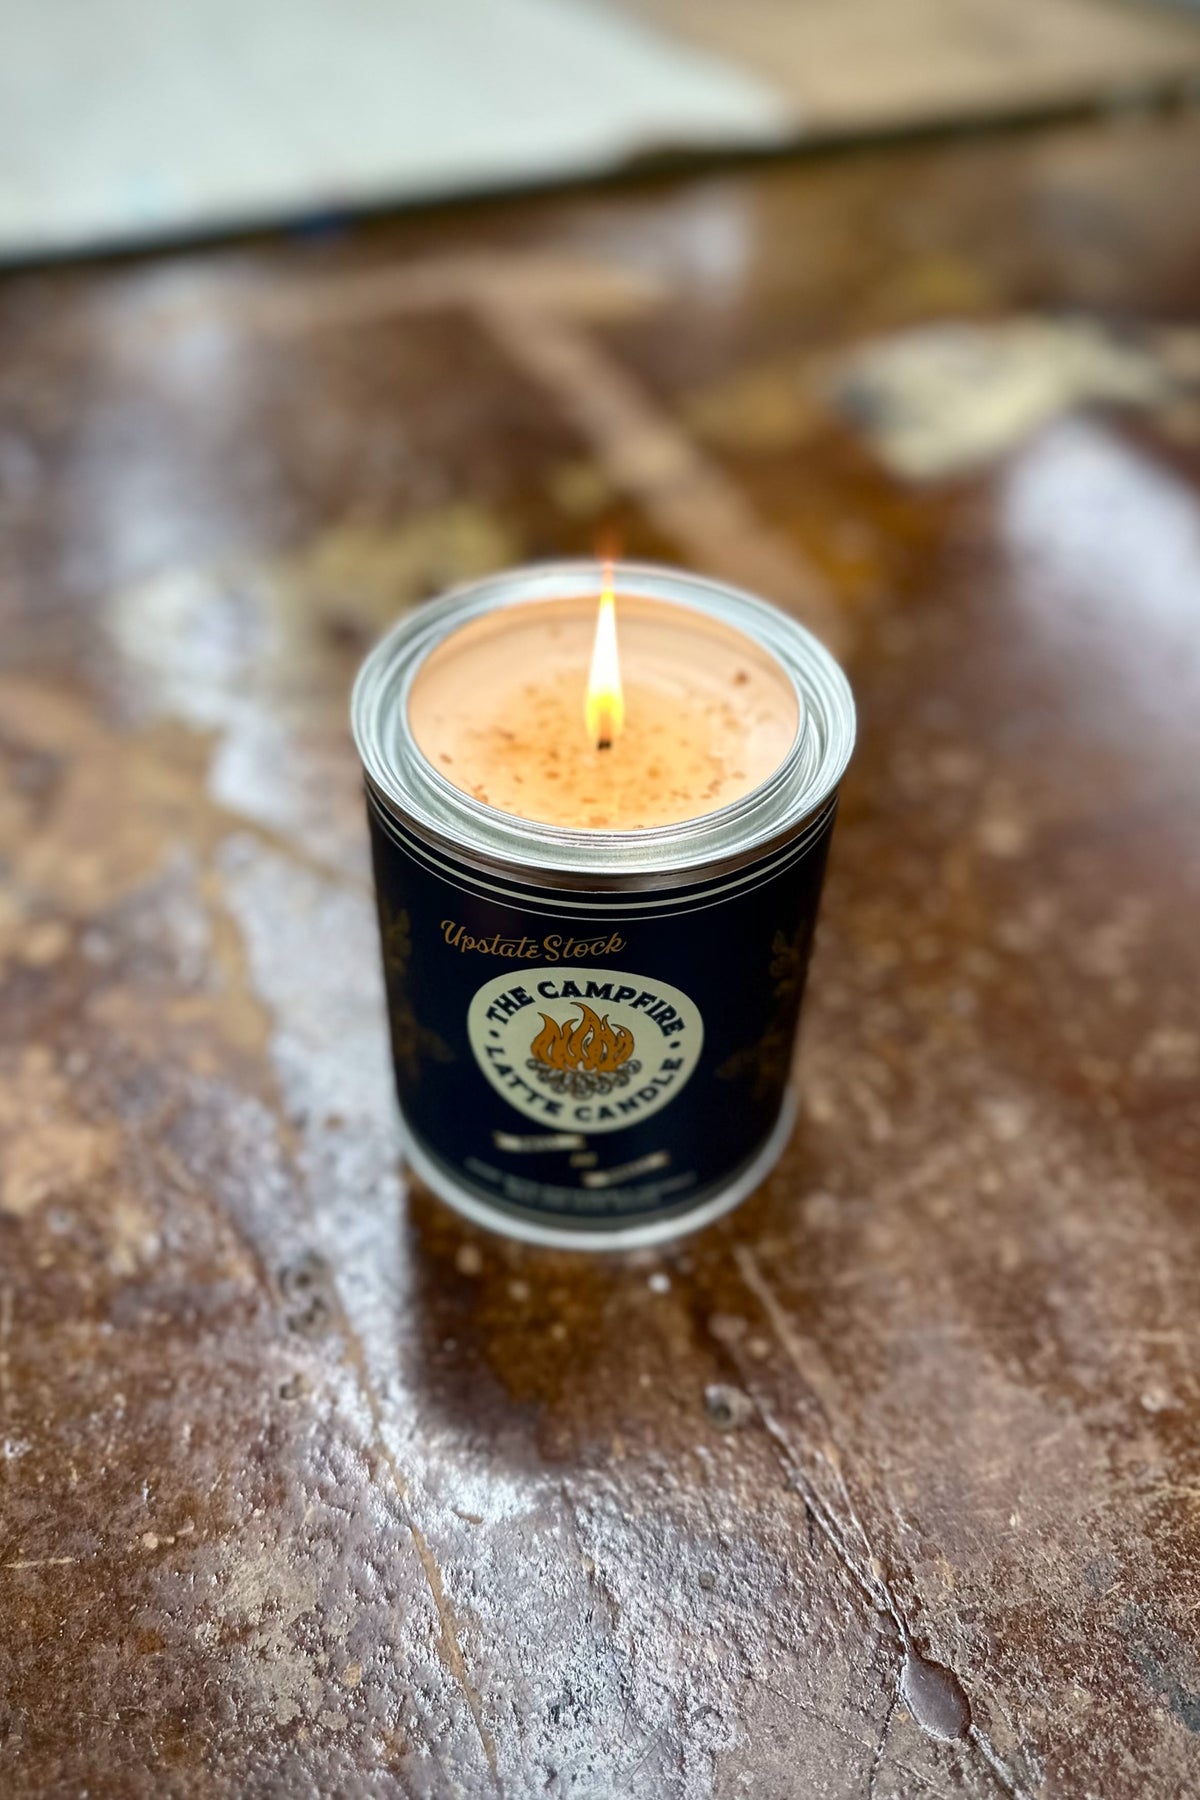 The Campfire Latte Paint Can Coconut Wax Candle